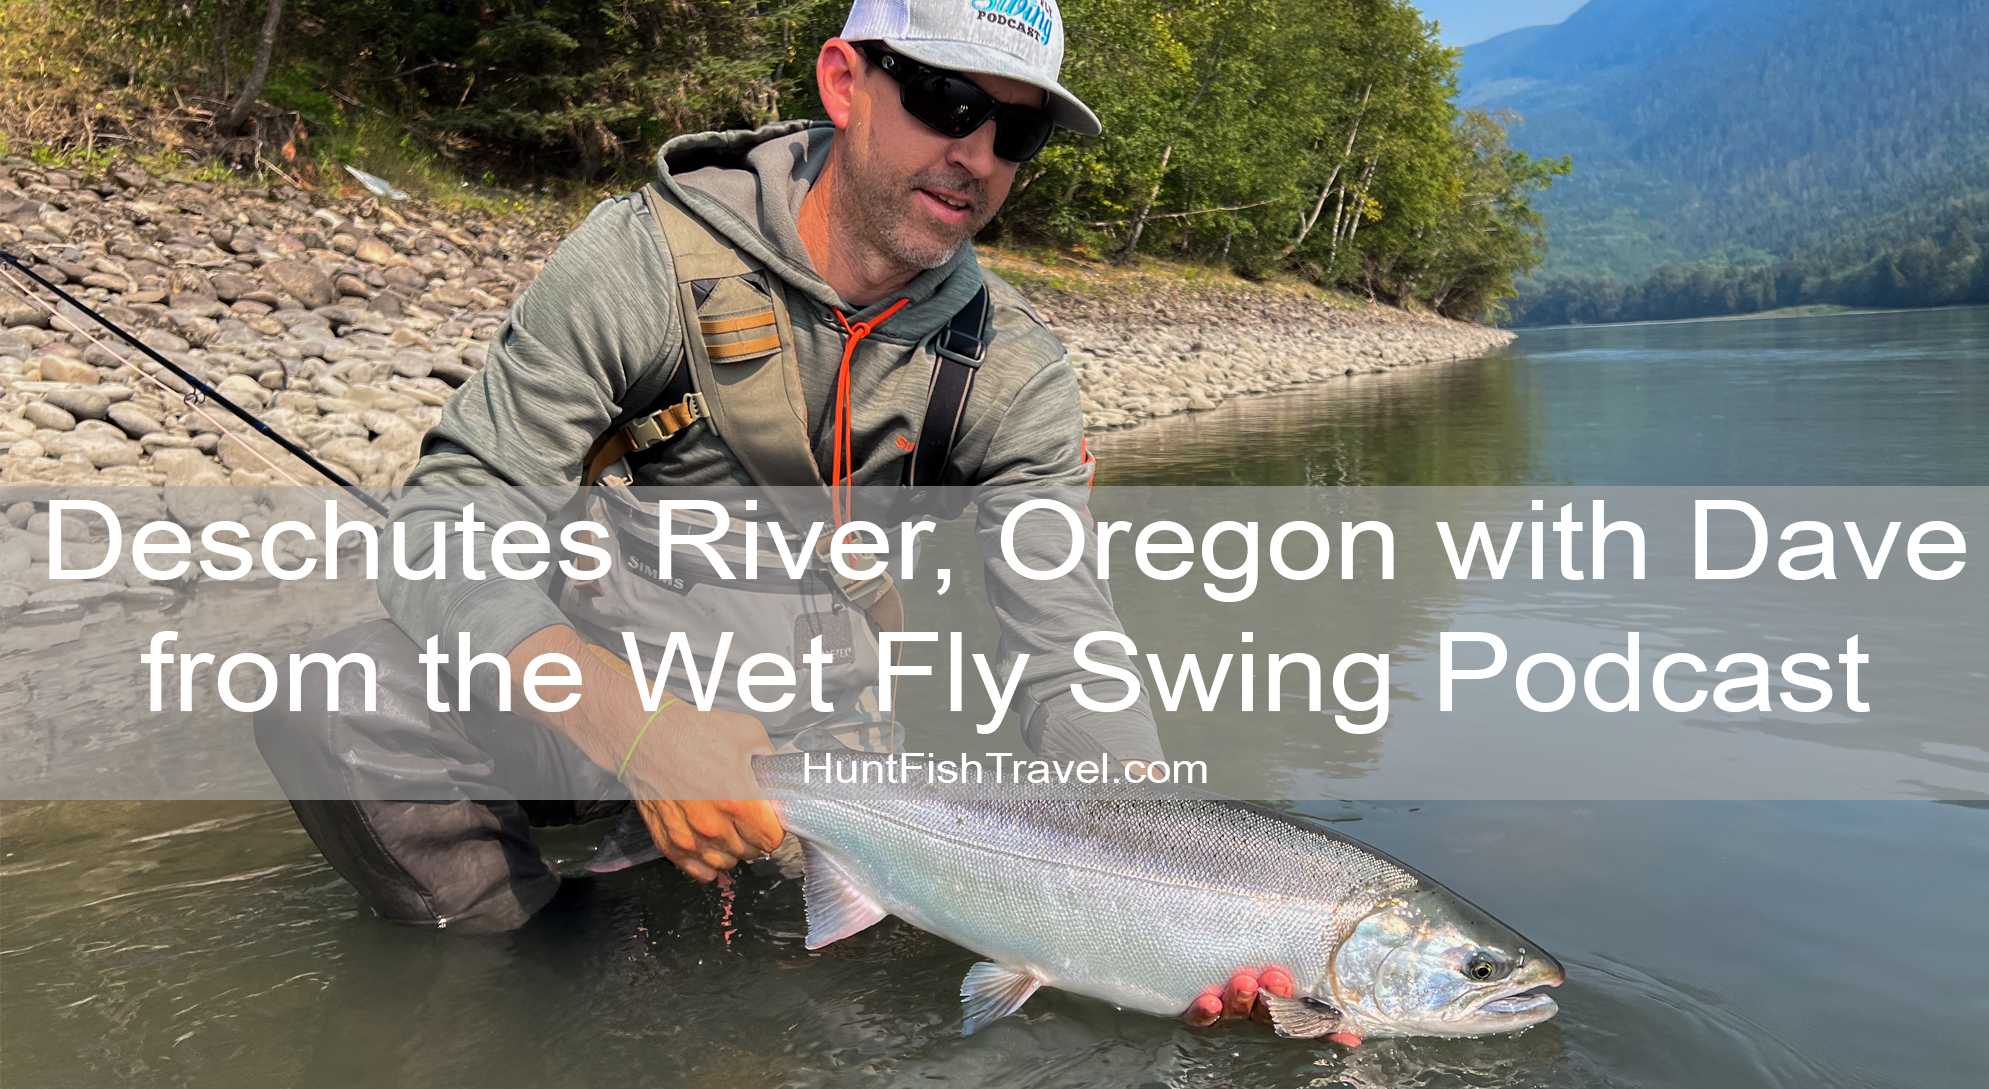 The HuntFishTravel Podcast Episode #238 – Deschutes River, Oregon with Dave from the Wet Fly Swing Podcast